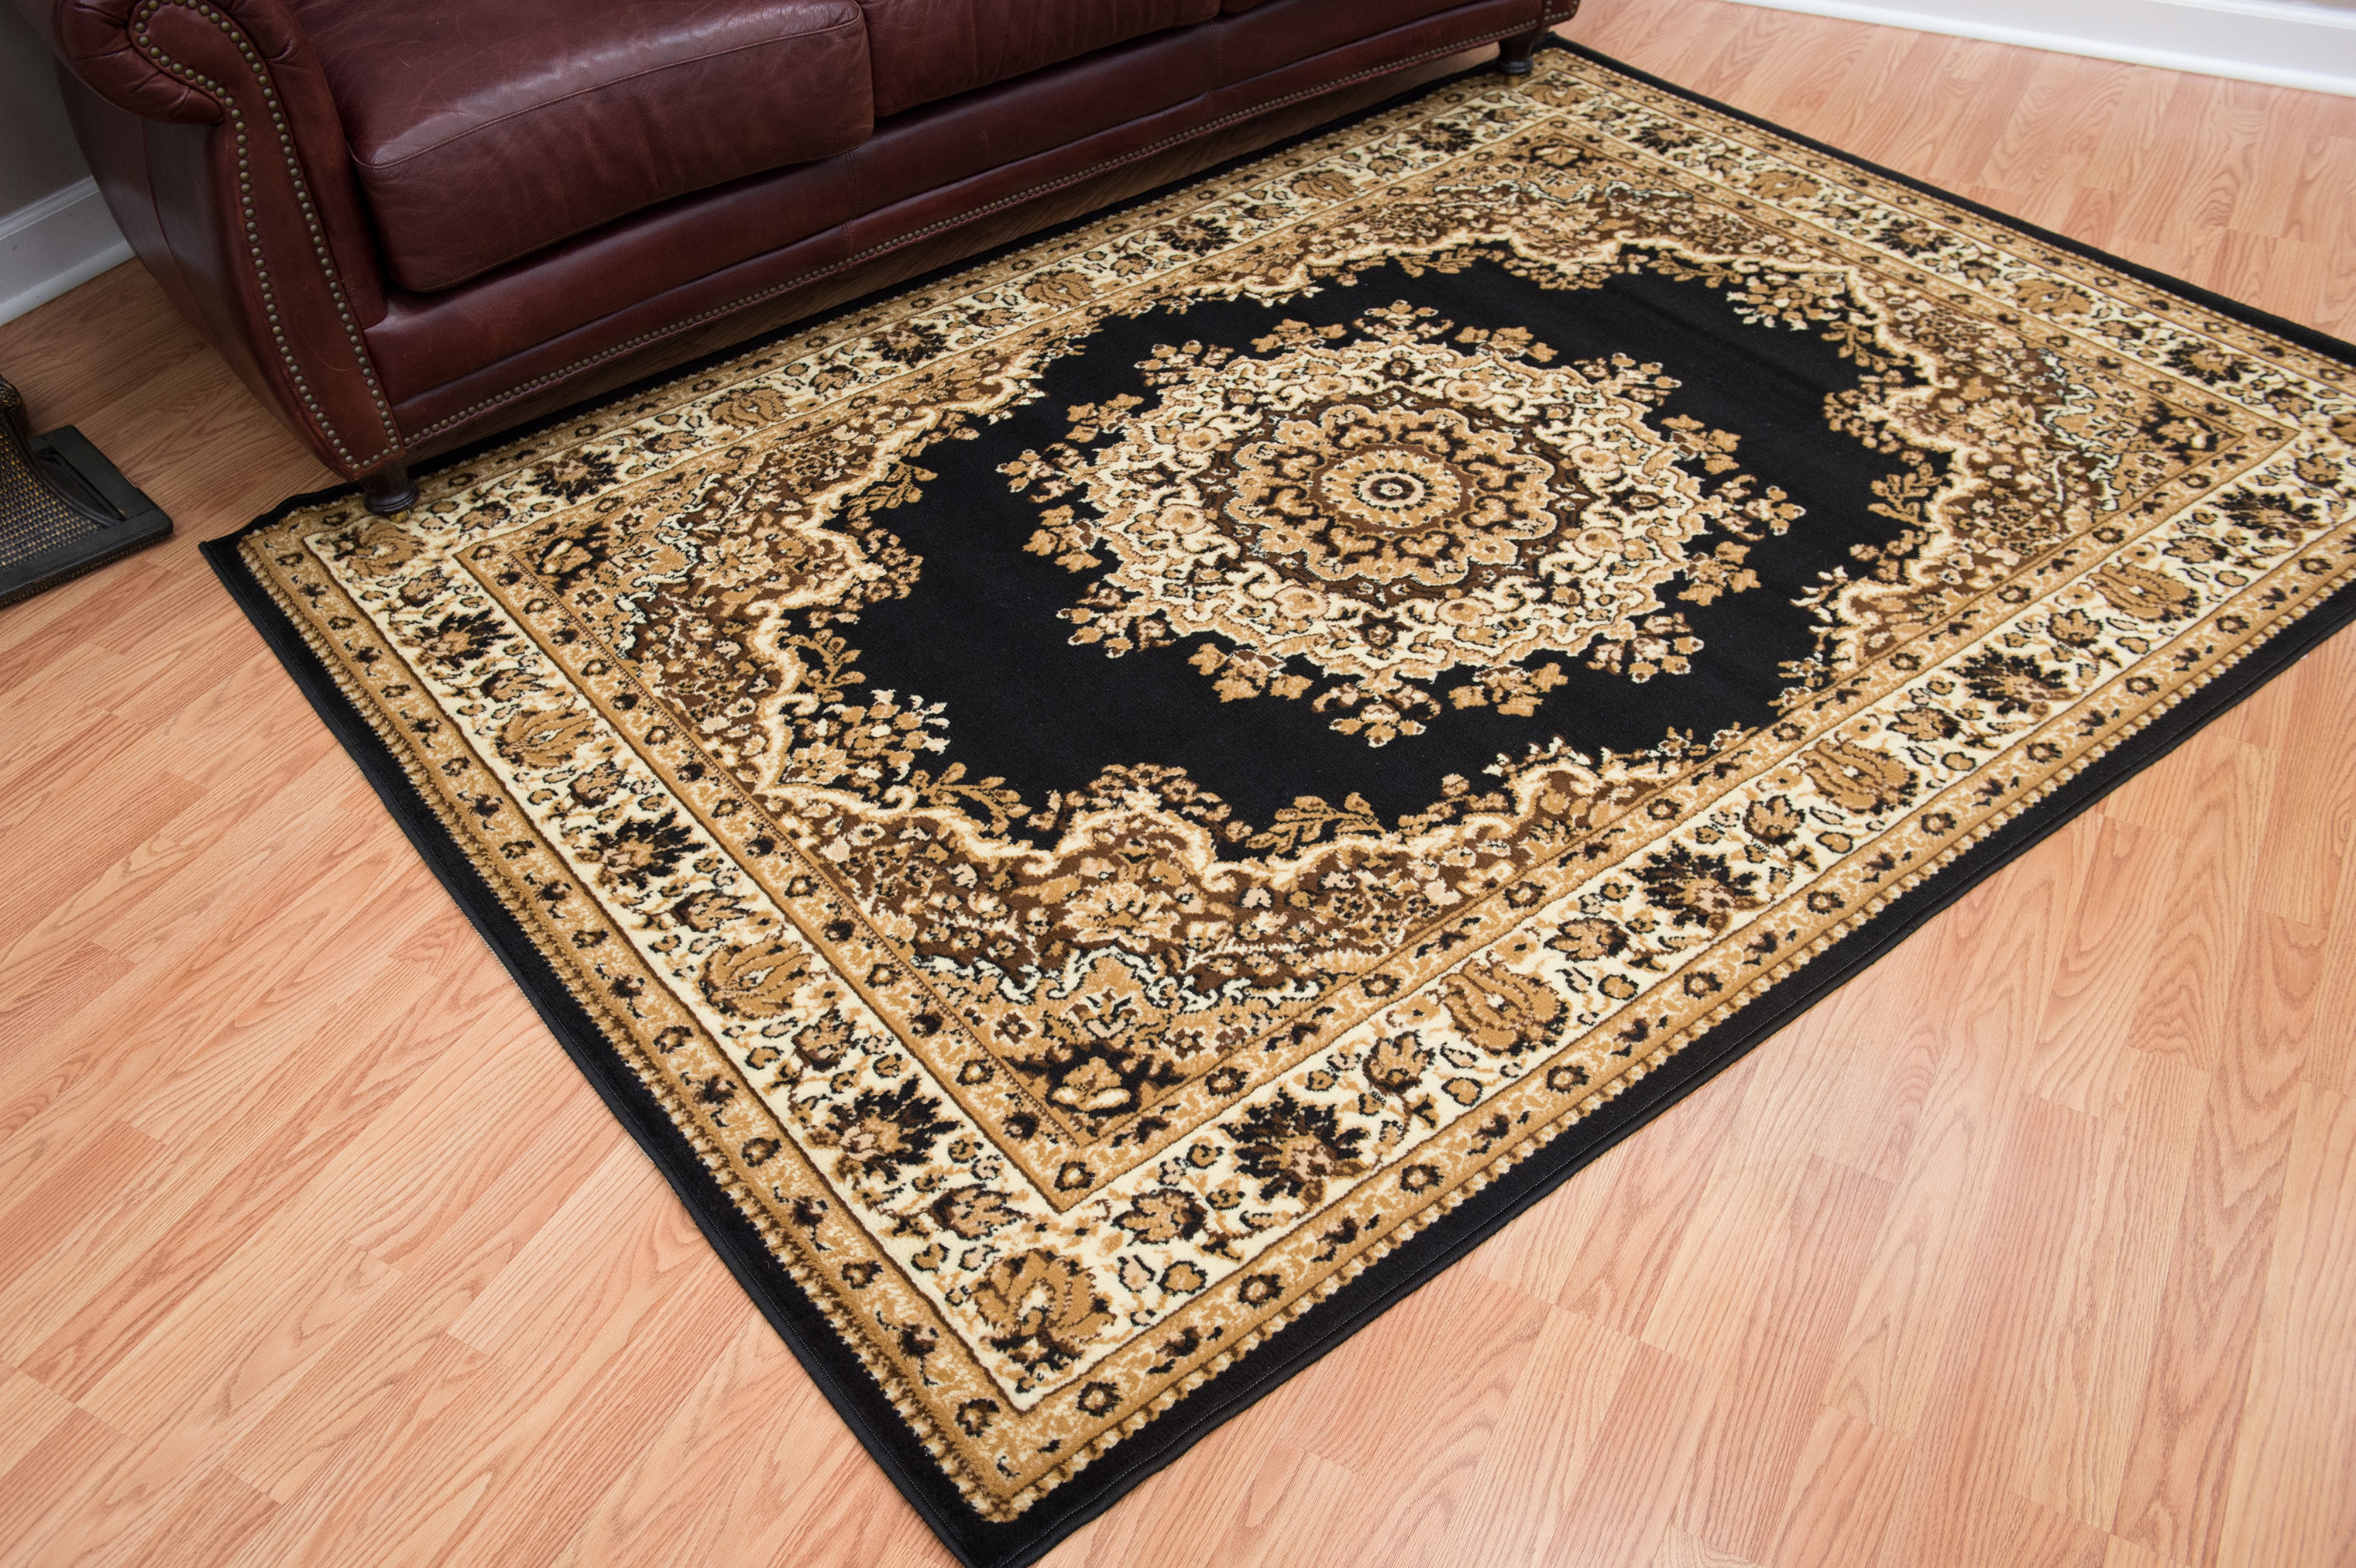 Designer Home Soft Traditional Oriental Area Rug with Center Medallion - Actual Size: 5' 3" x 7' 2" Rectangle (Black) - image 1 of 5